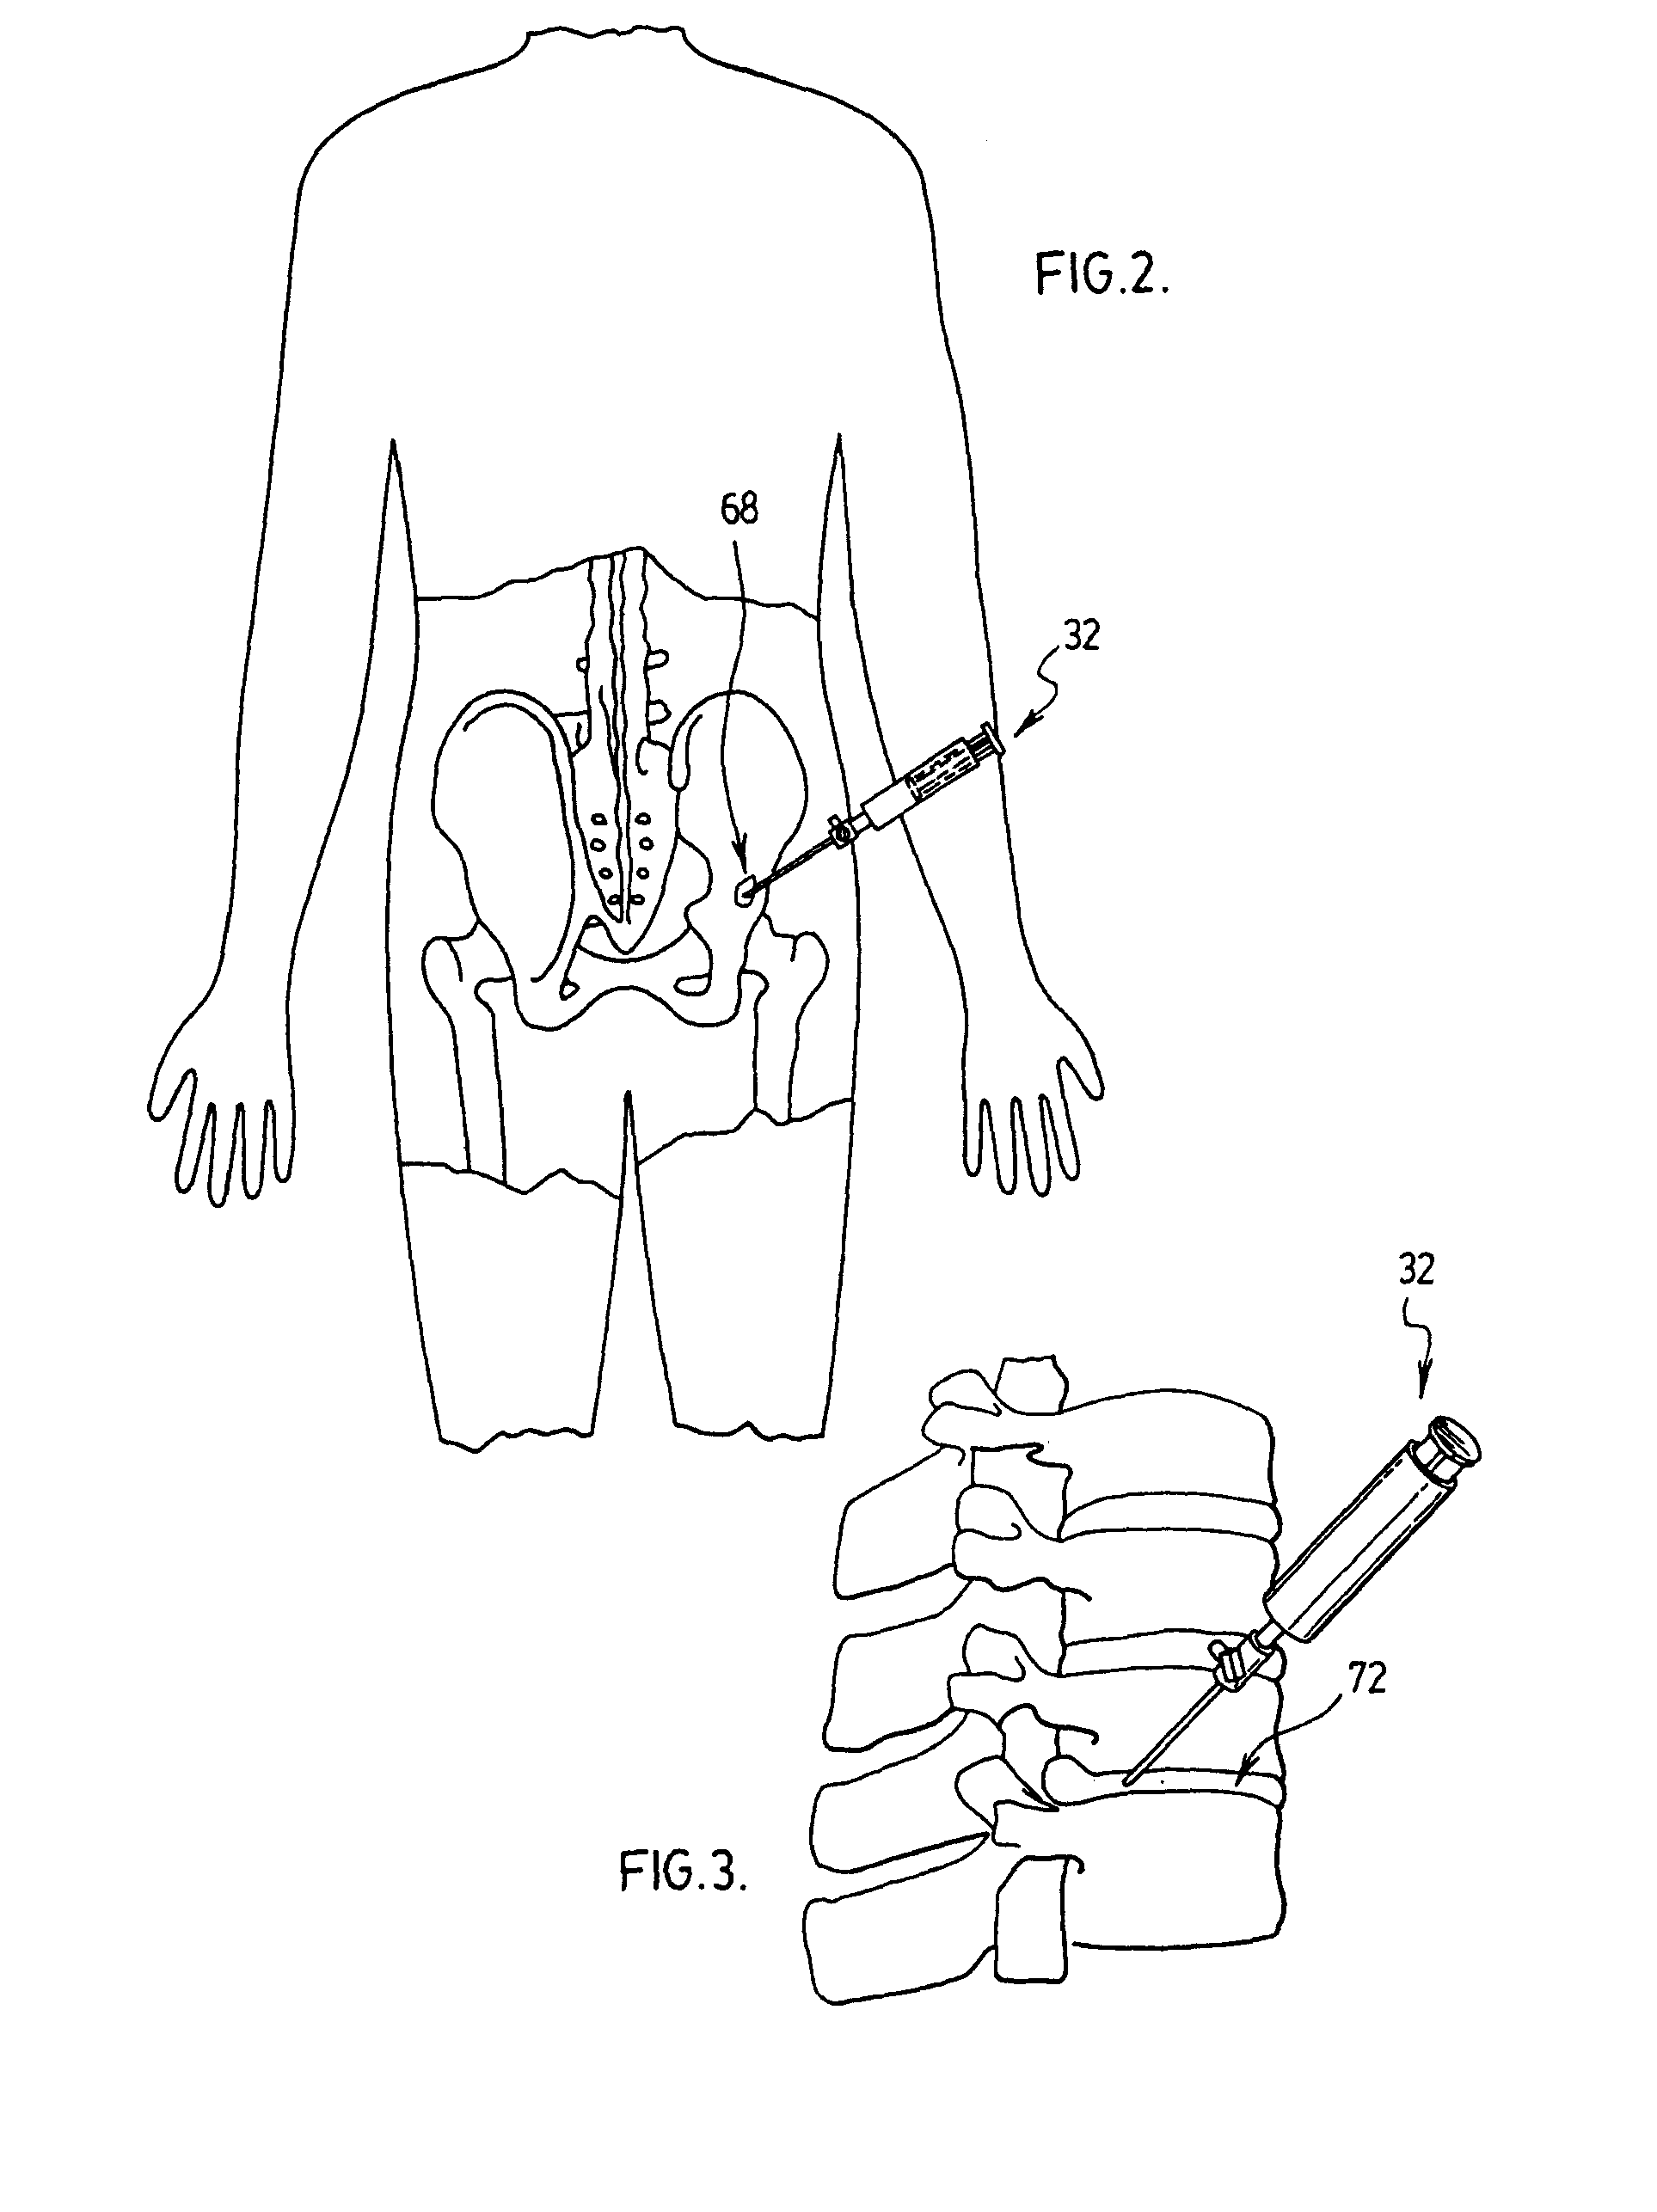 Method for administering a therapeutic agent into tissue